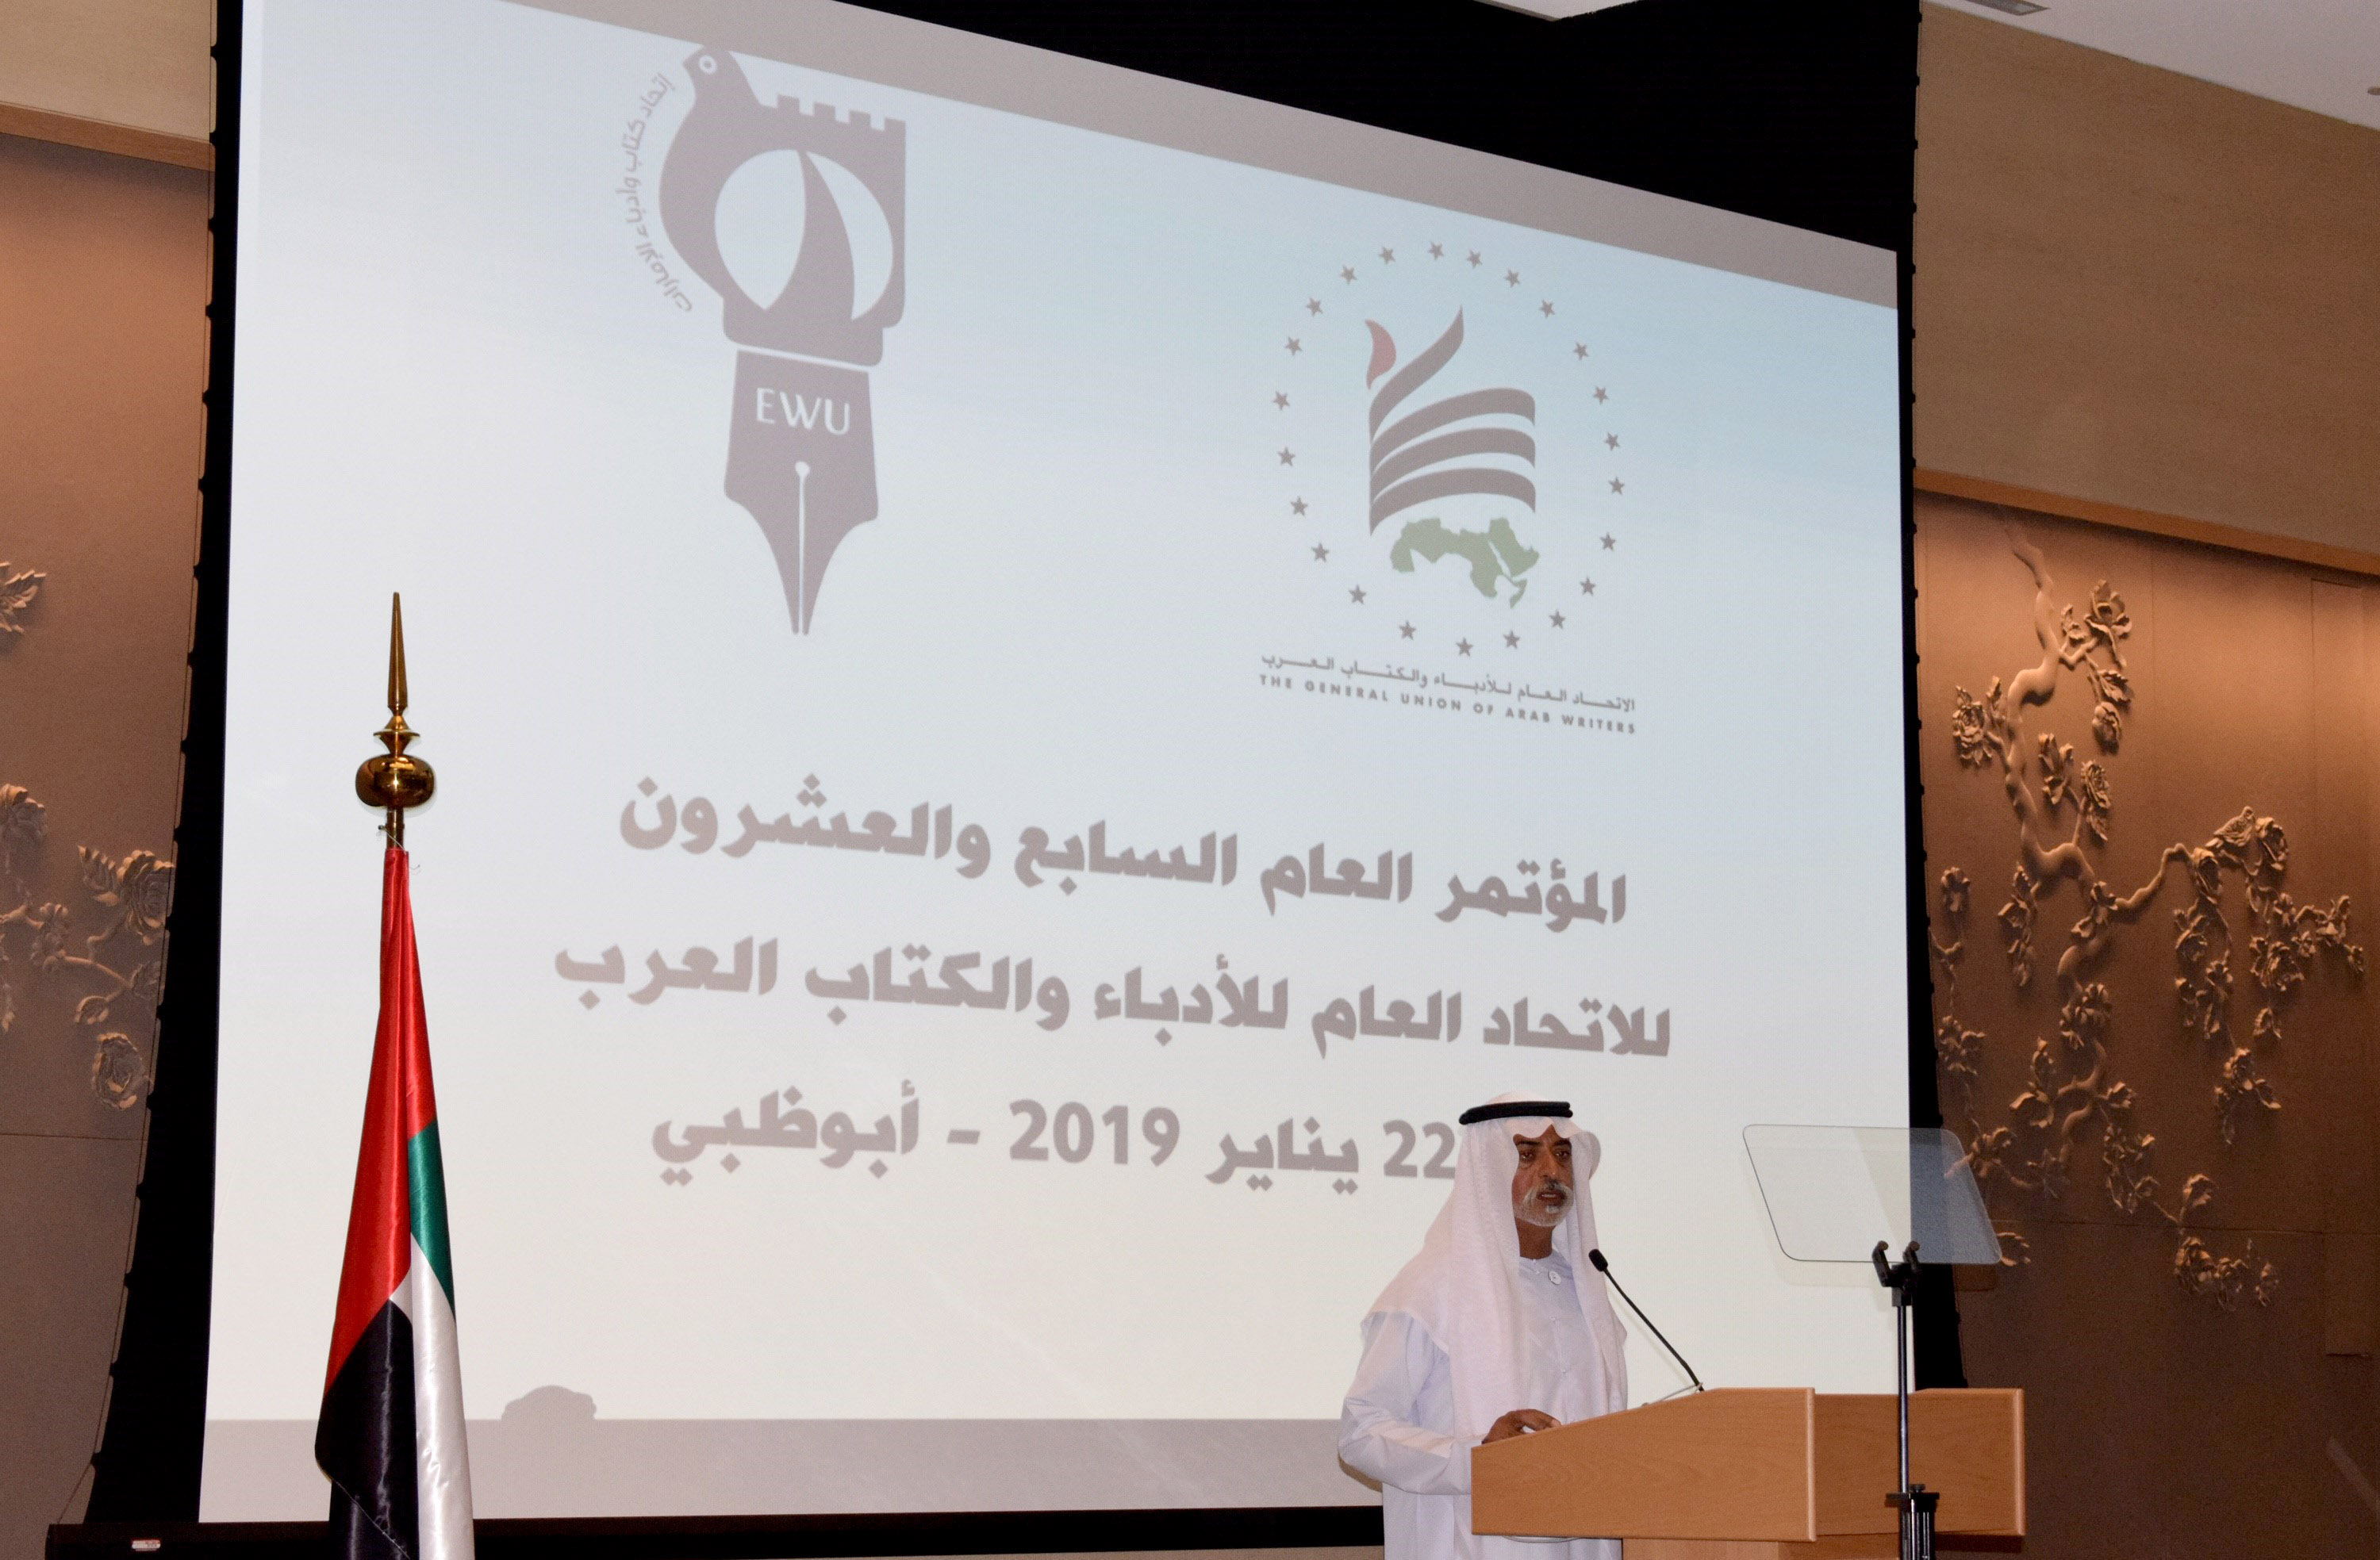 The 27th Conference of the General Union of Arab Writers in Abu Dhabi